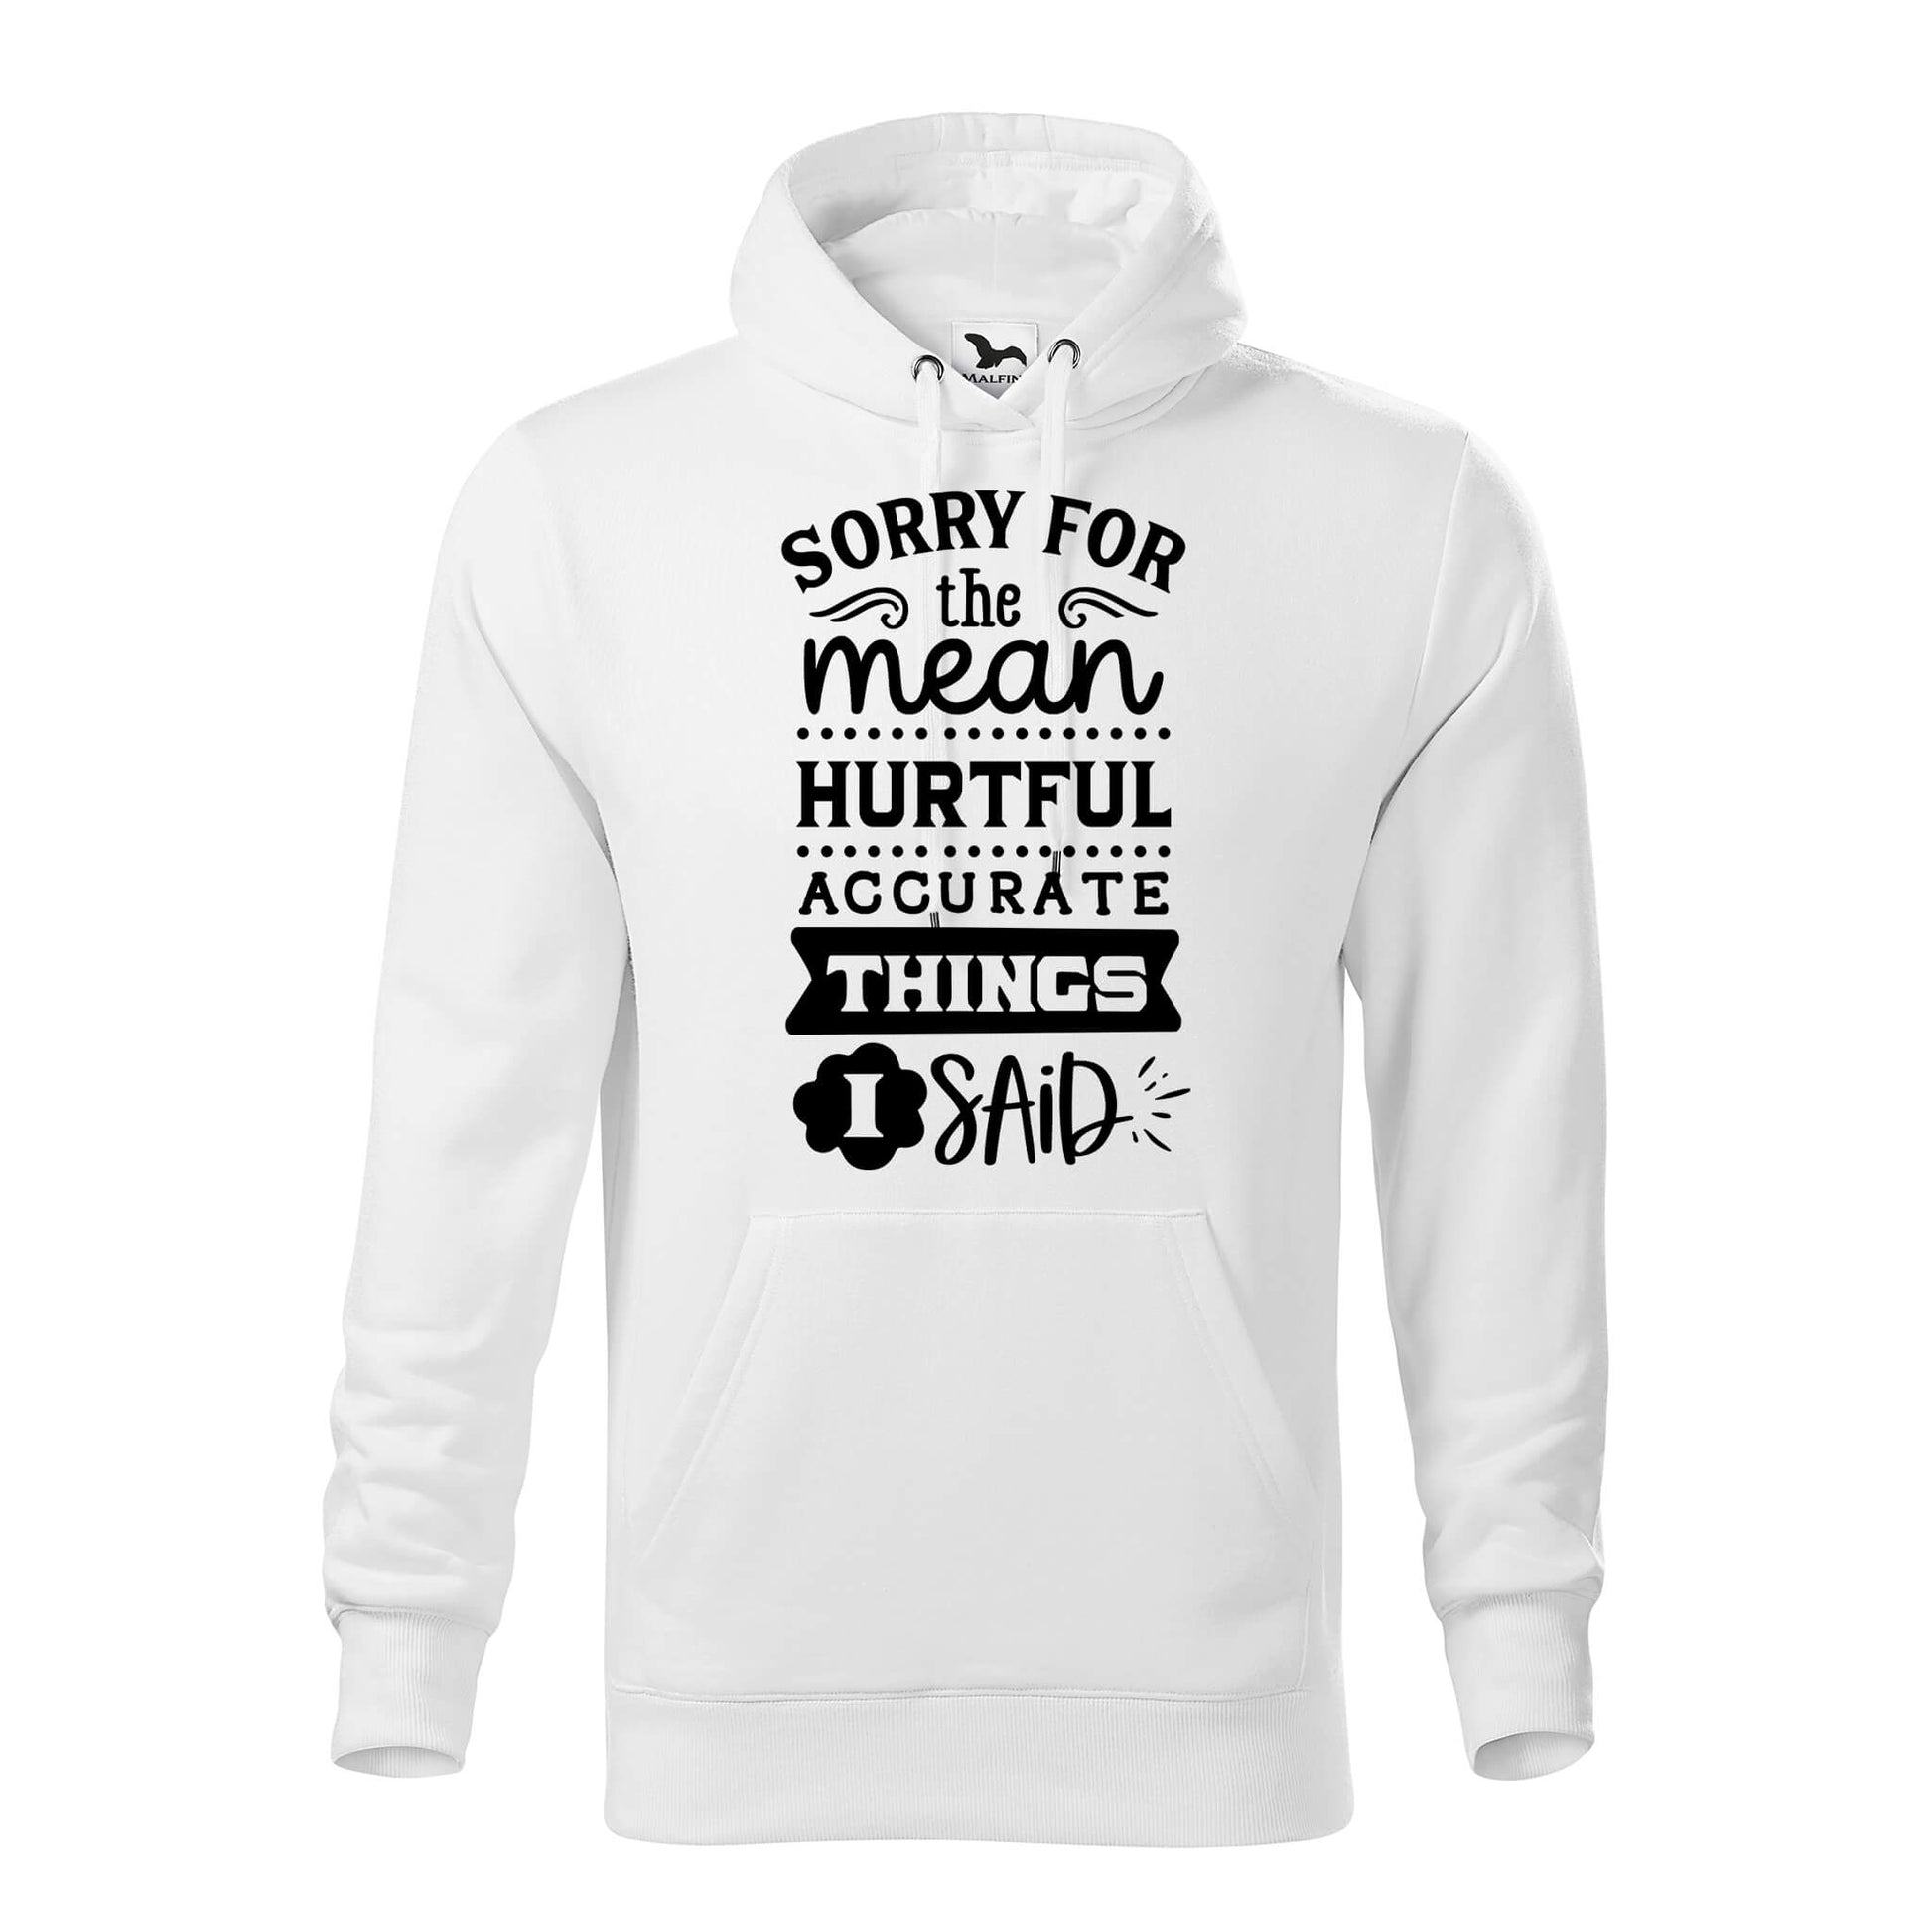 Sorry for the mean  hoodie - rvdesignprint